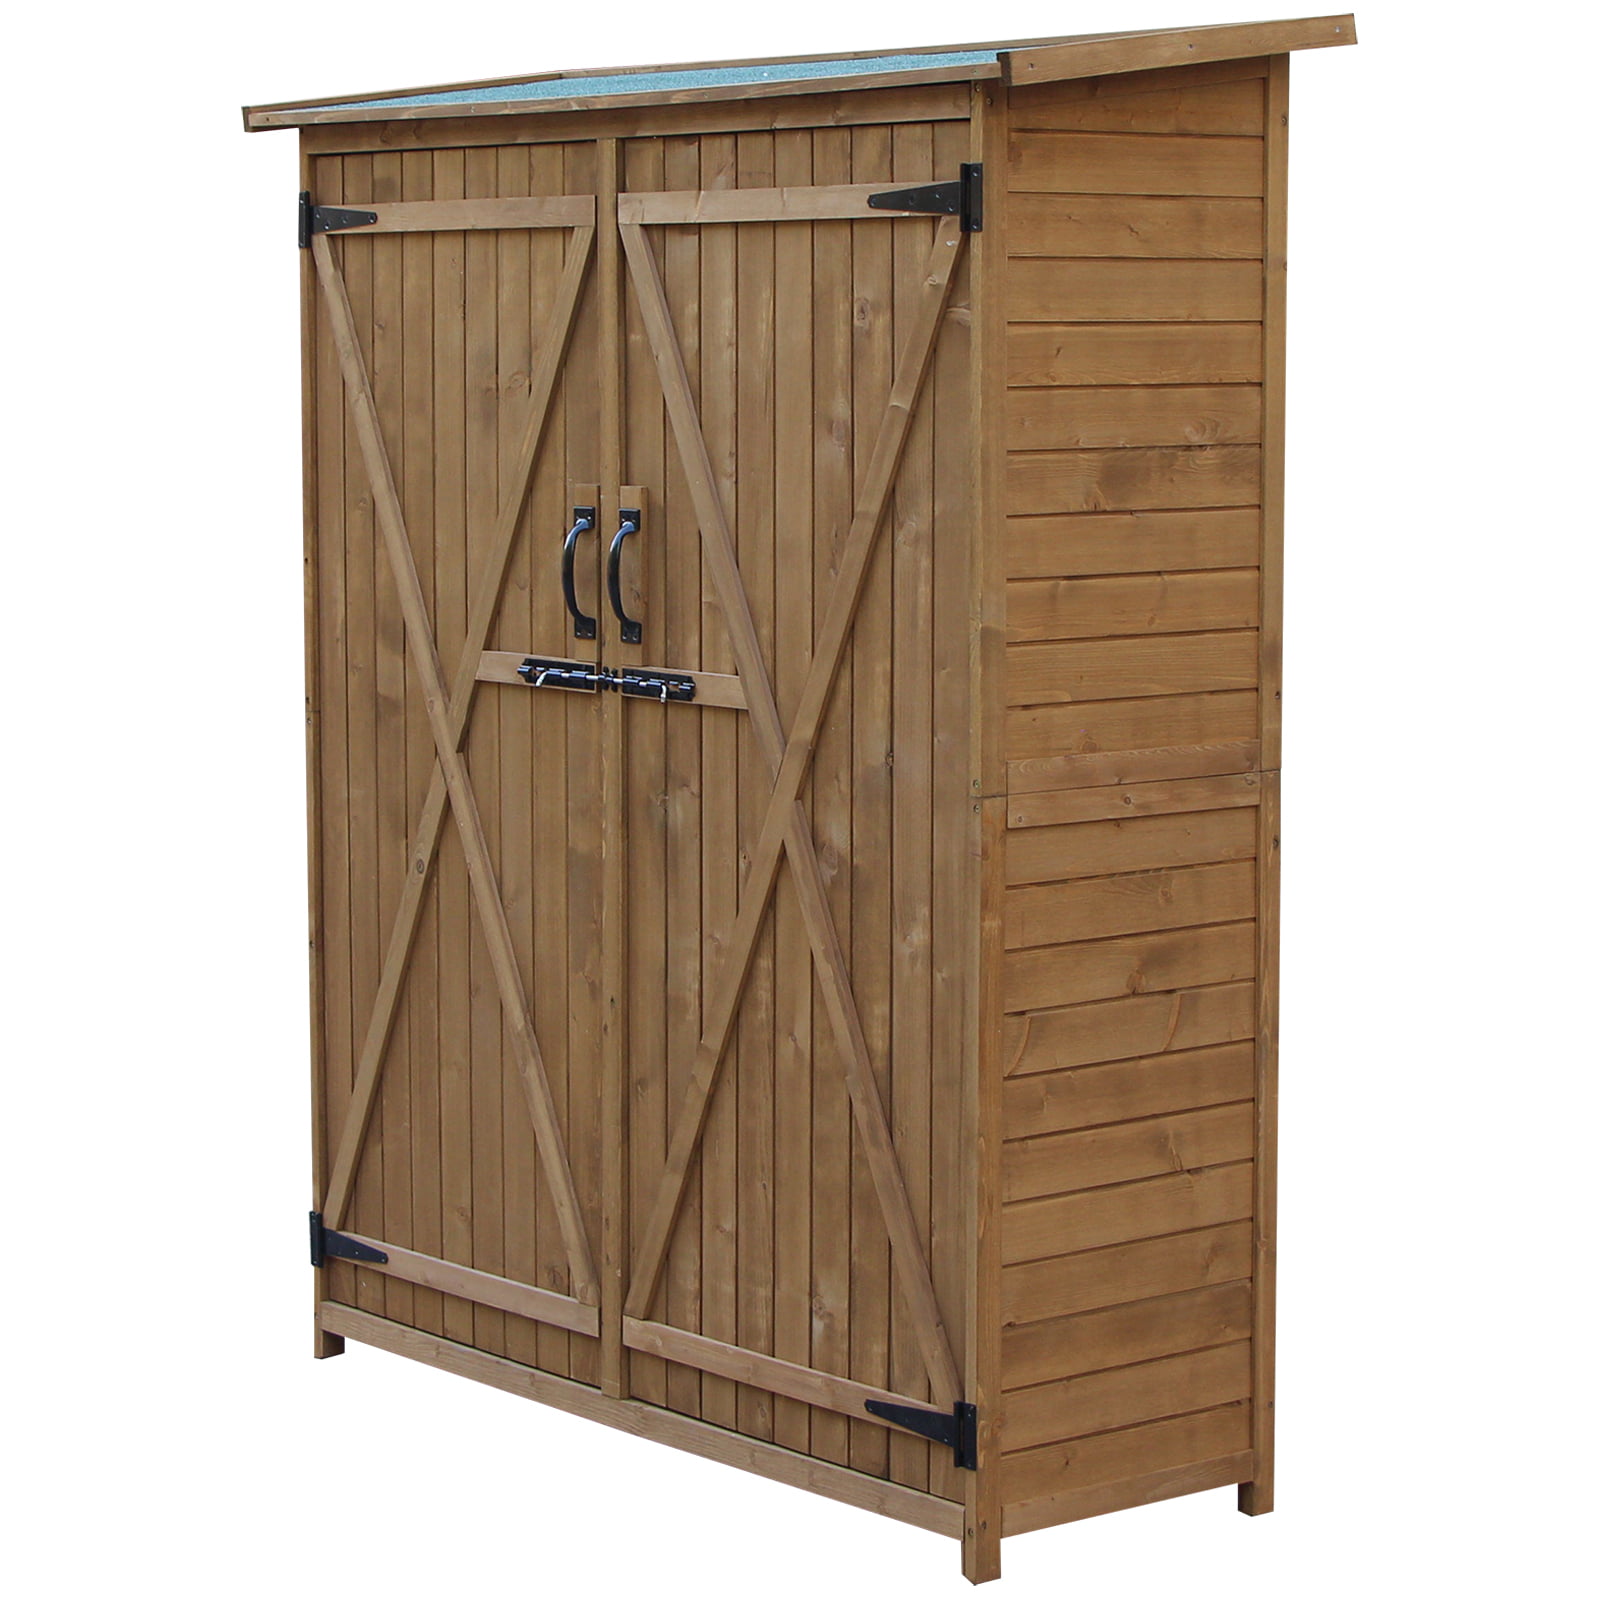 Outsunny Fir Wood Storage Shed, Waterproof Outdoor Tool Organizer ...